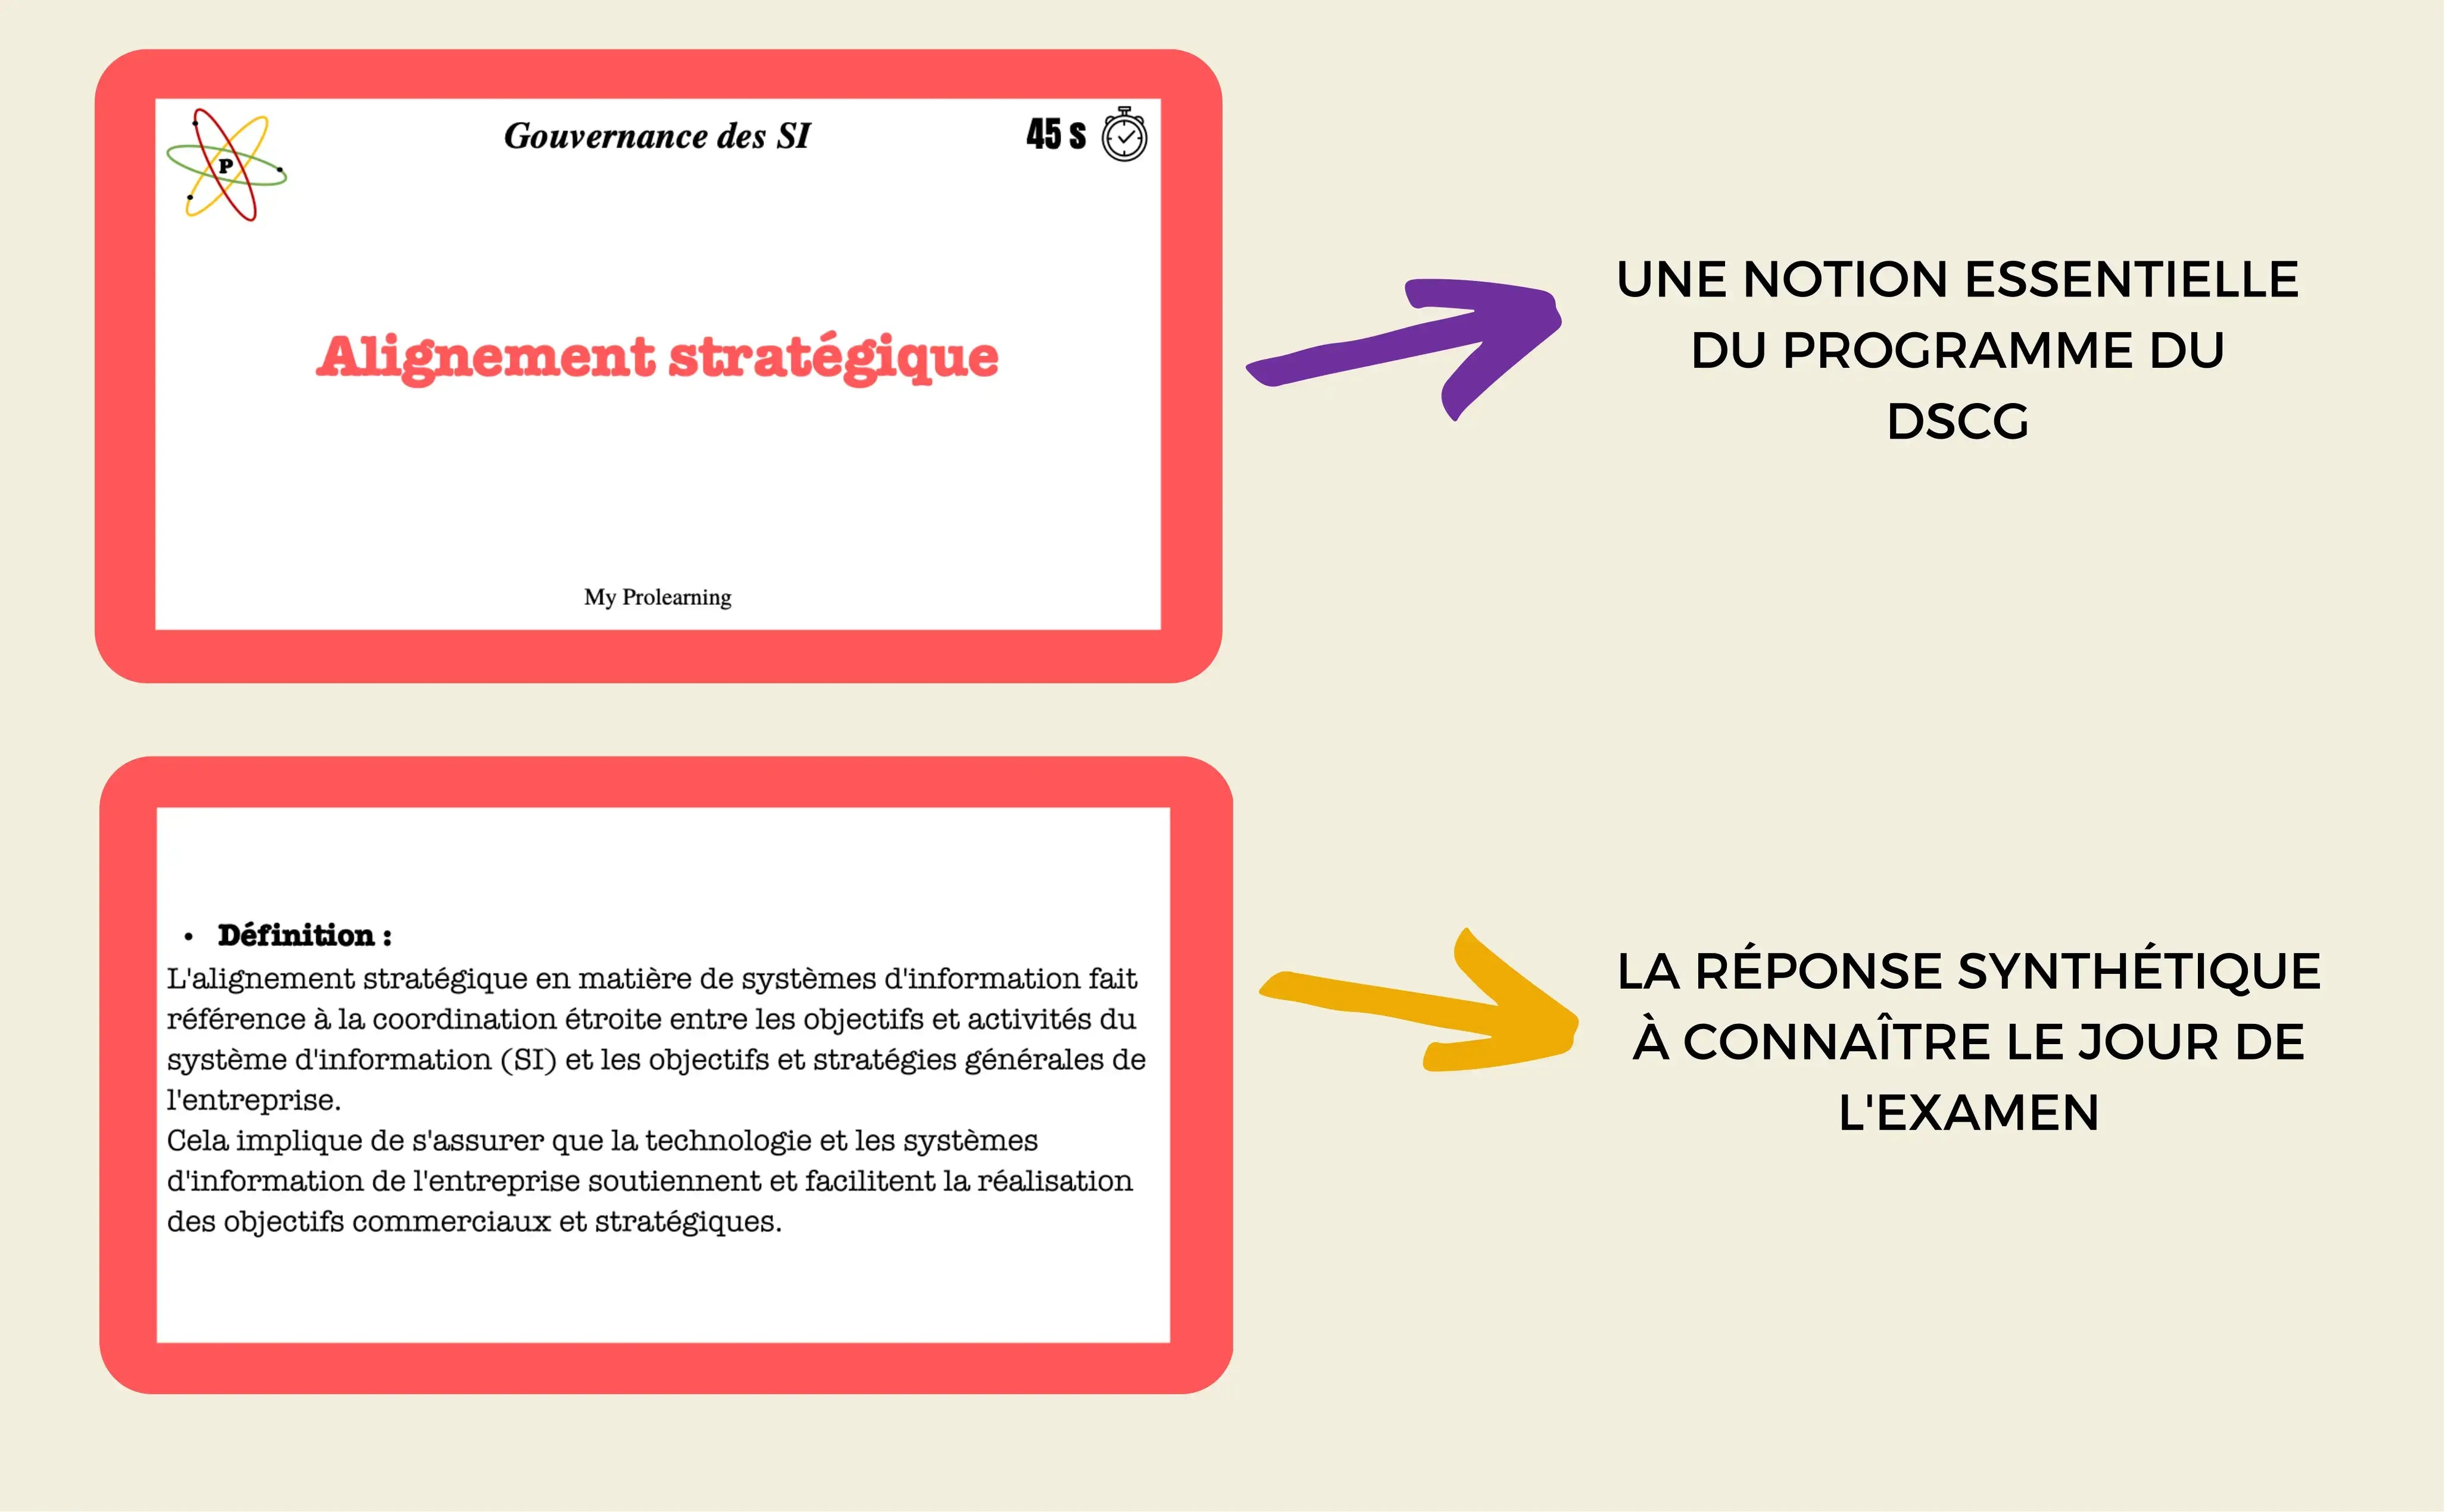 FICHES GOUVERNANCE DES SI - My Prolearning 